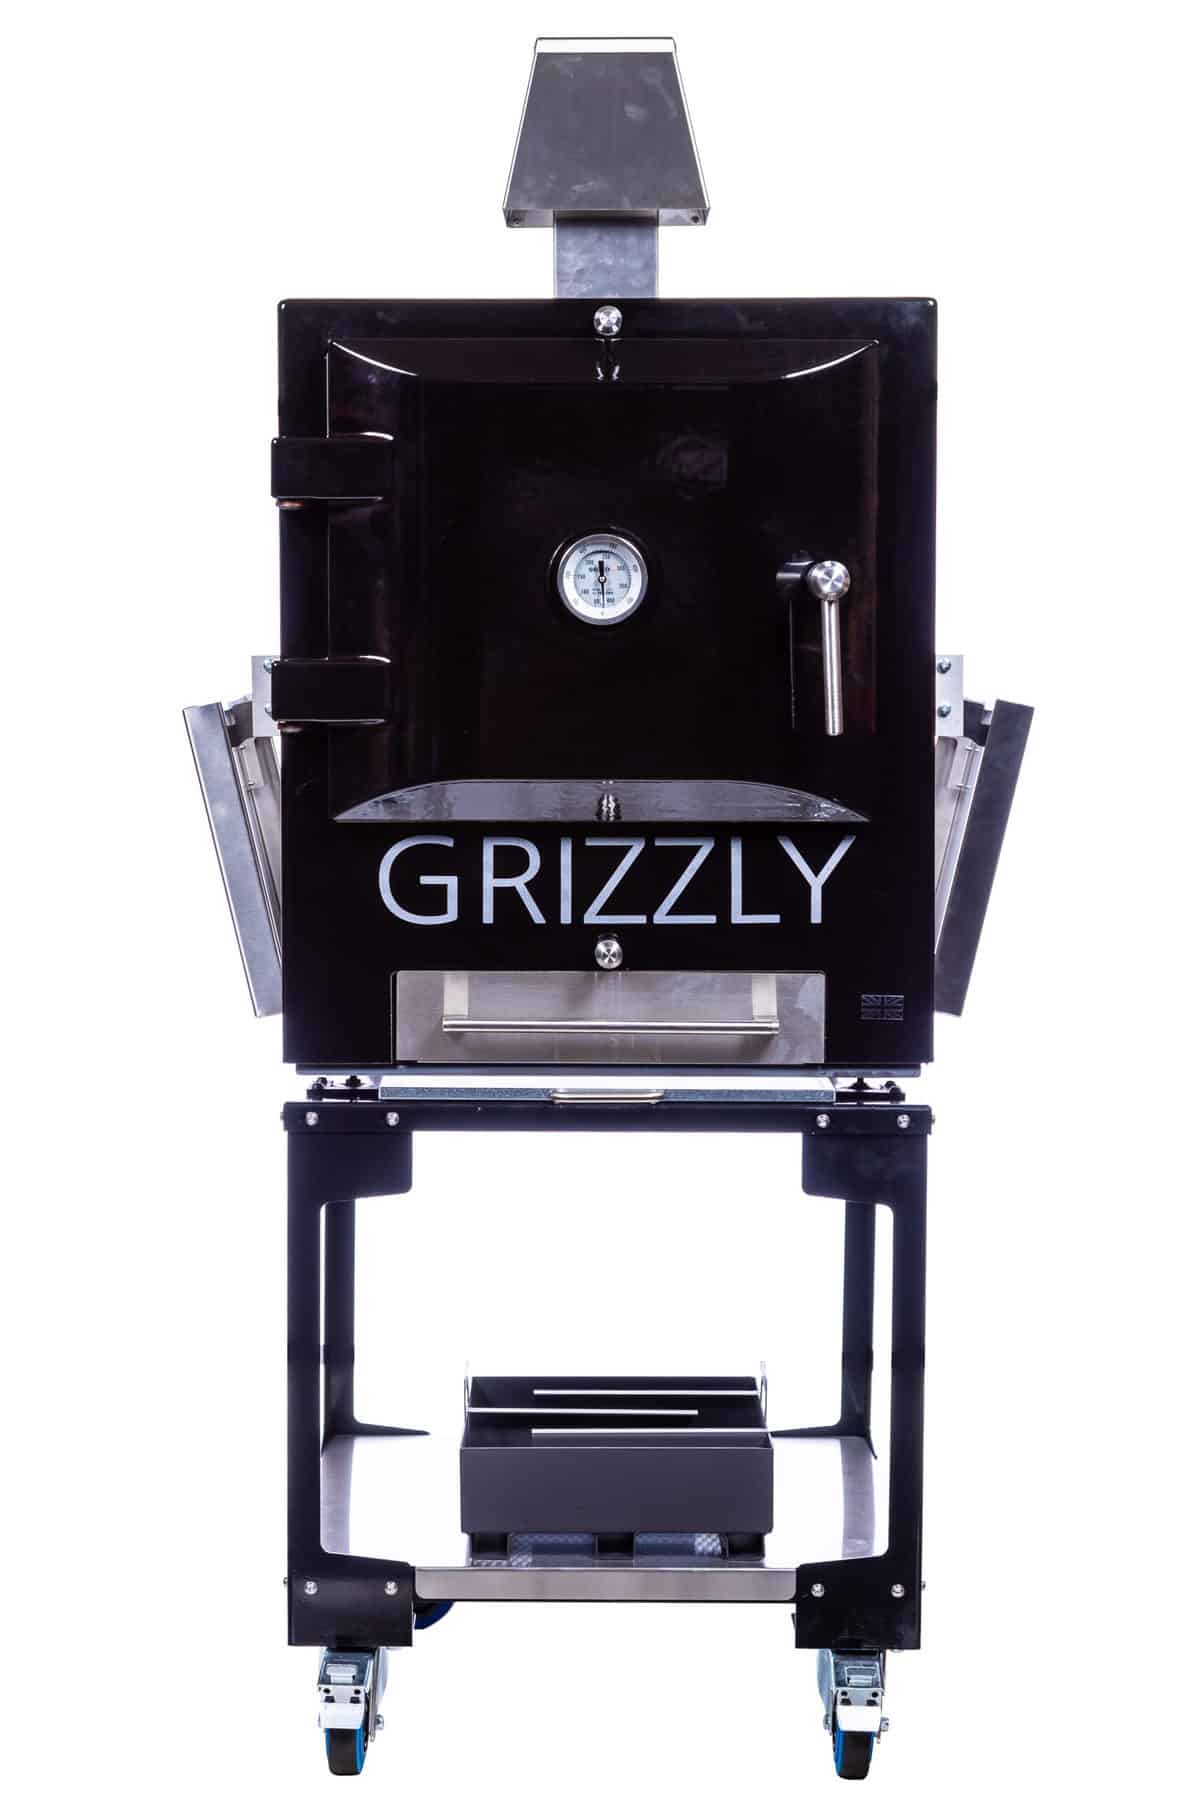 Black Grizzly oven